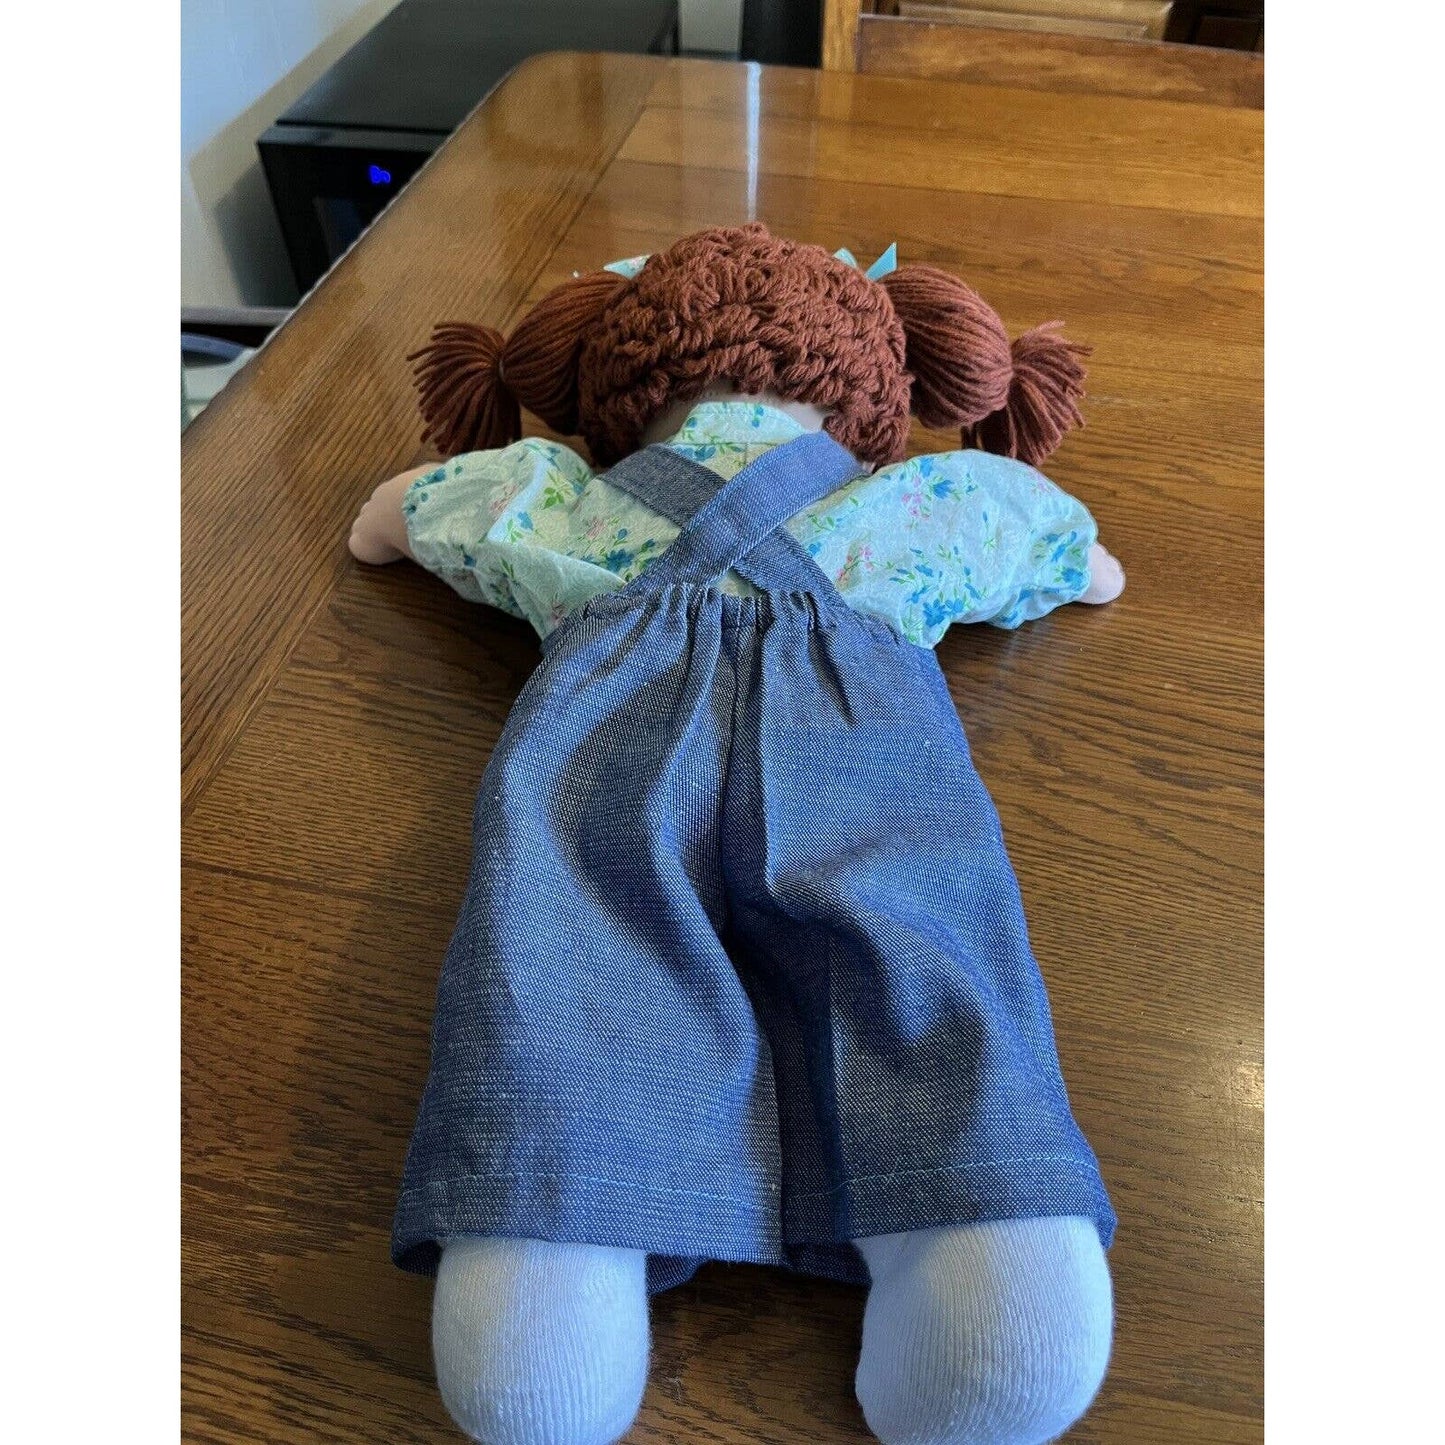 1980s Cabbage Patch Kid Brown Poodle Pigtails & Eyes Overalls Floral Shirt Bows